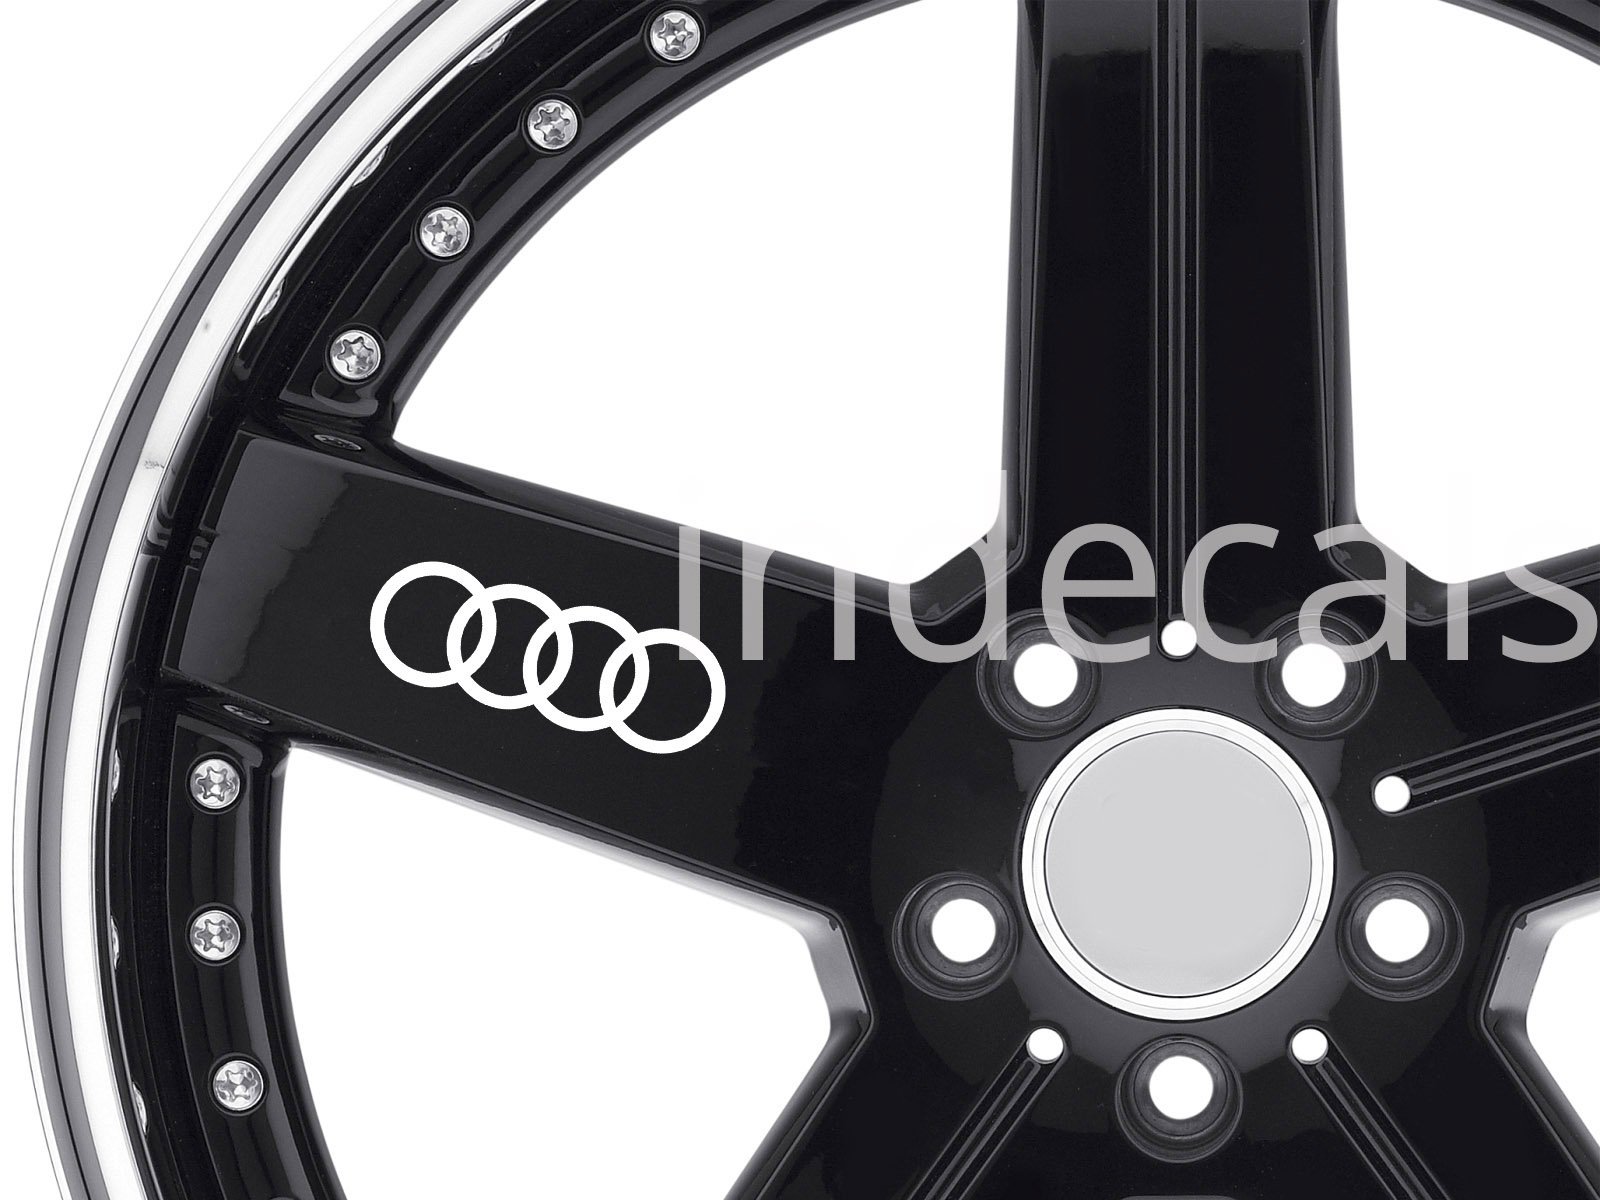 6 x Audi Rings Stickers for Wheels - White